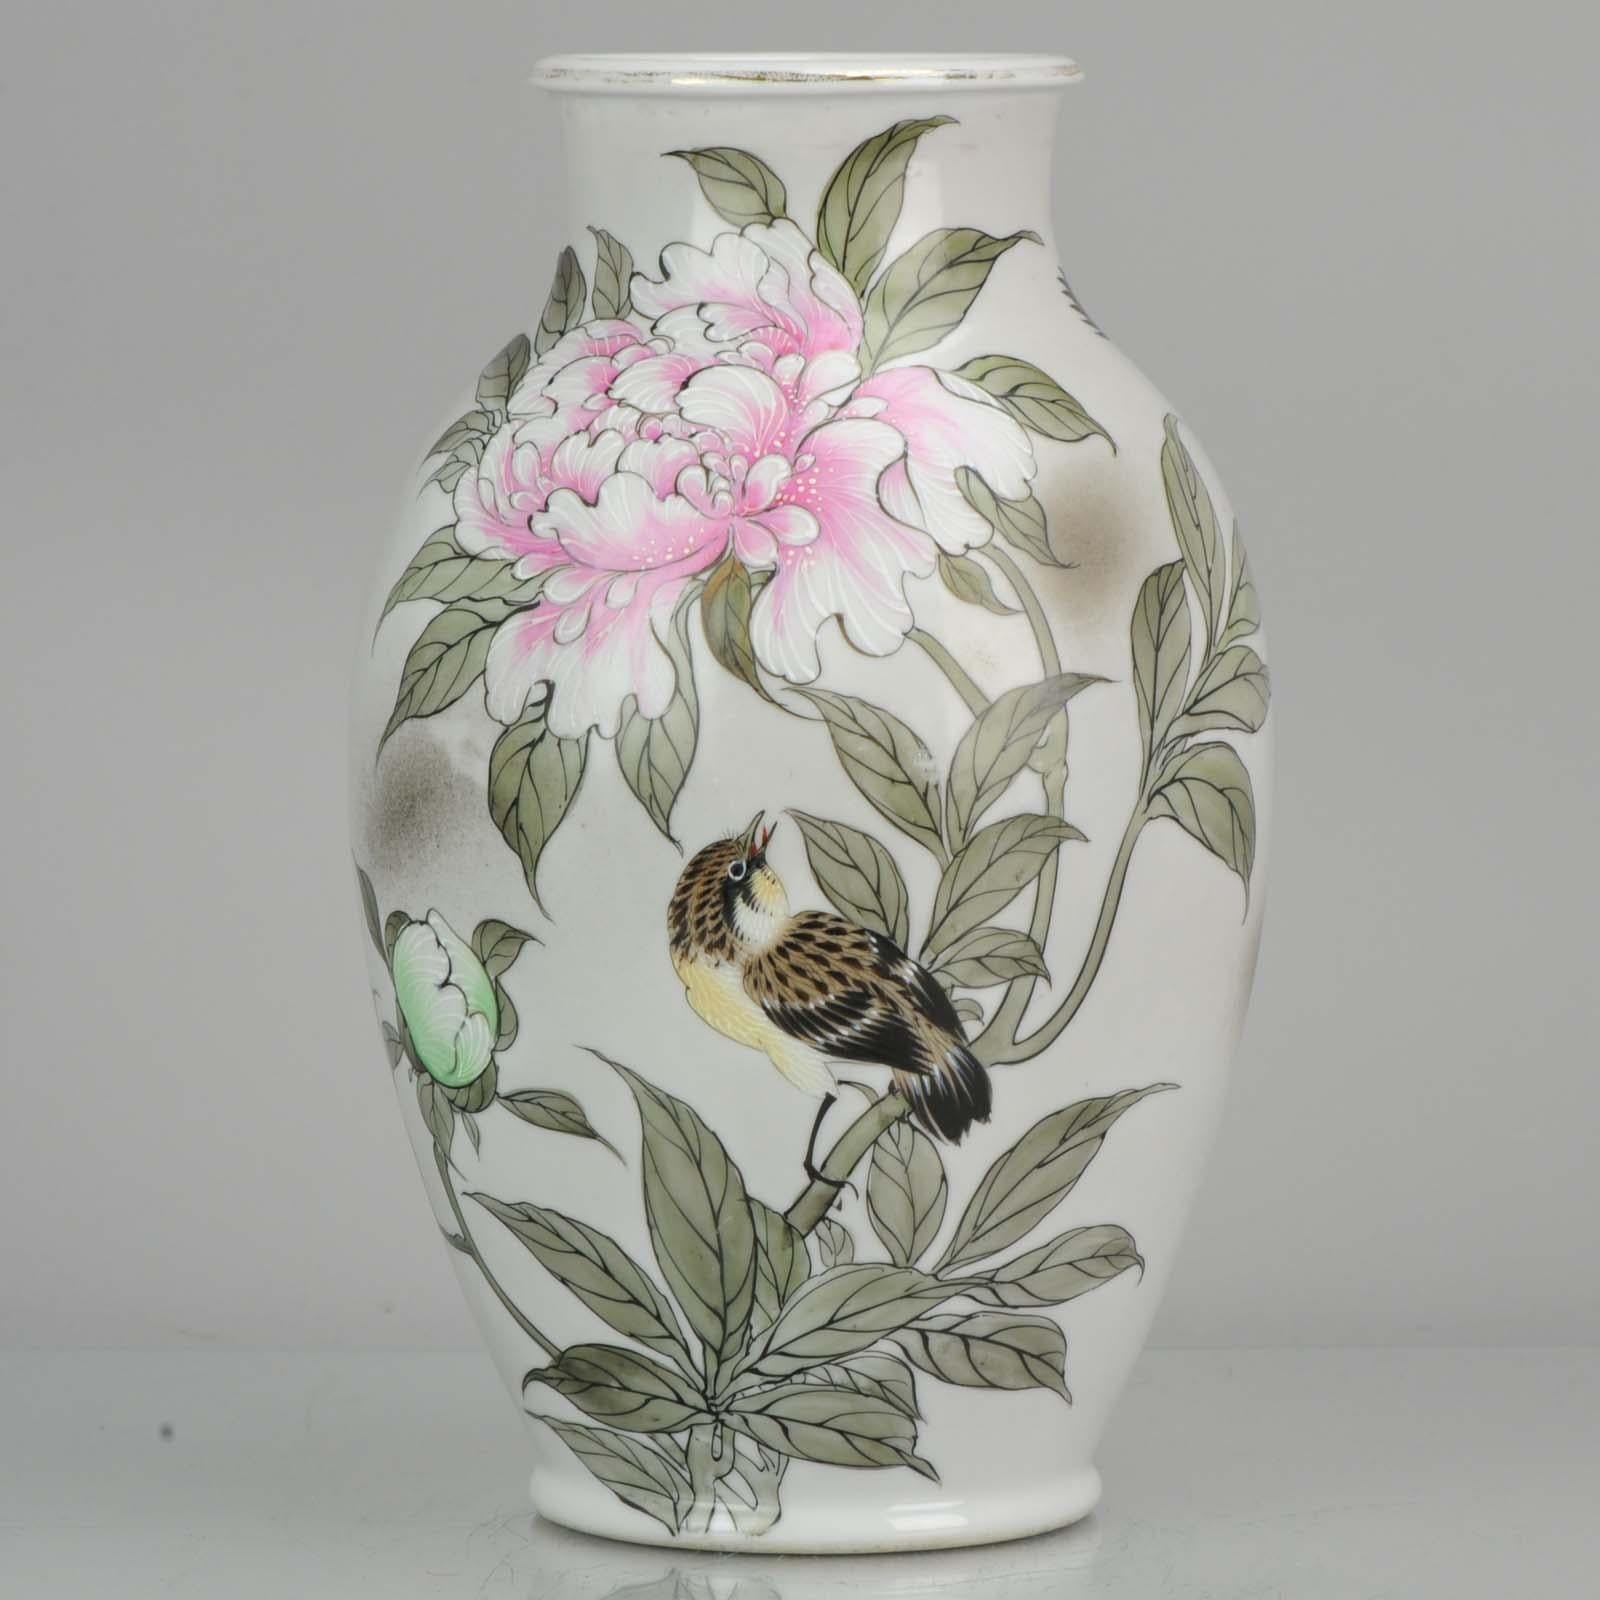 Lovely and rare piece.

Additional information:
Material: Porcelain & Pottery
Region of Origin: Japan
Period: Showa Periode (1926-1989)
Original/Reproduction: Original
Condition: Overall some ennamel loss, otherwise perfect.
Dimension: 25.5 H cm